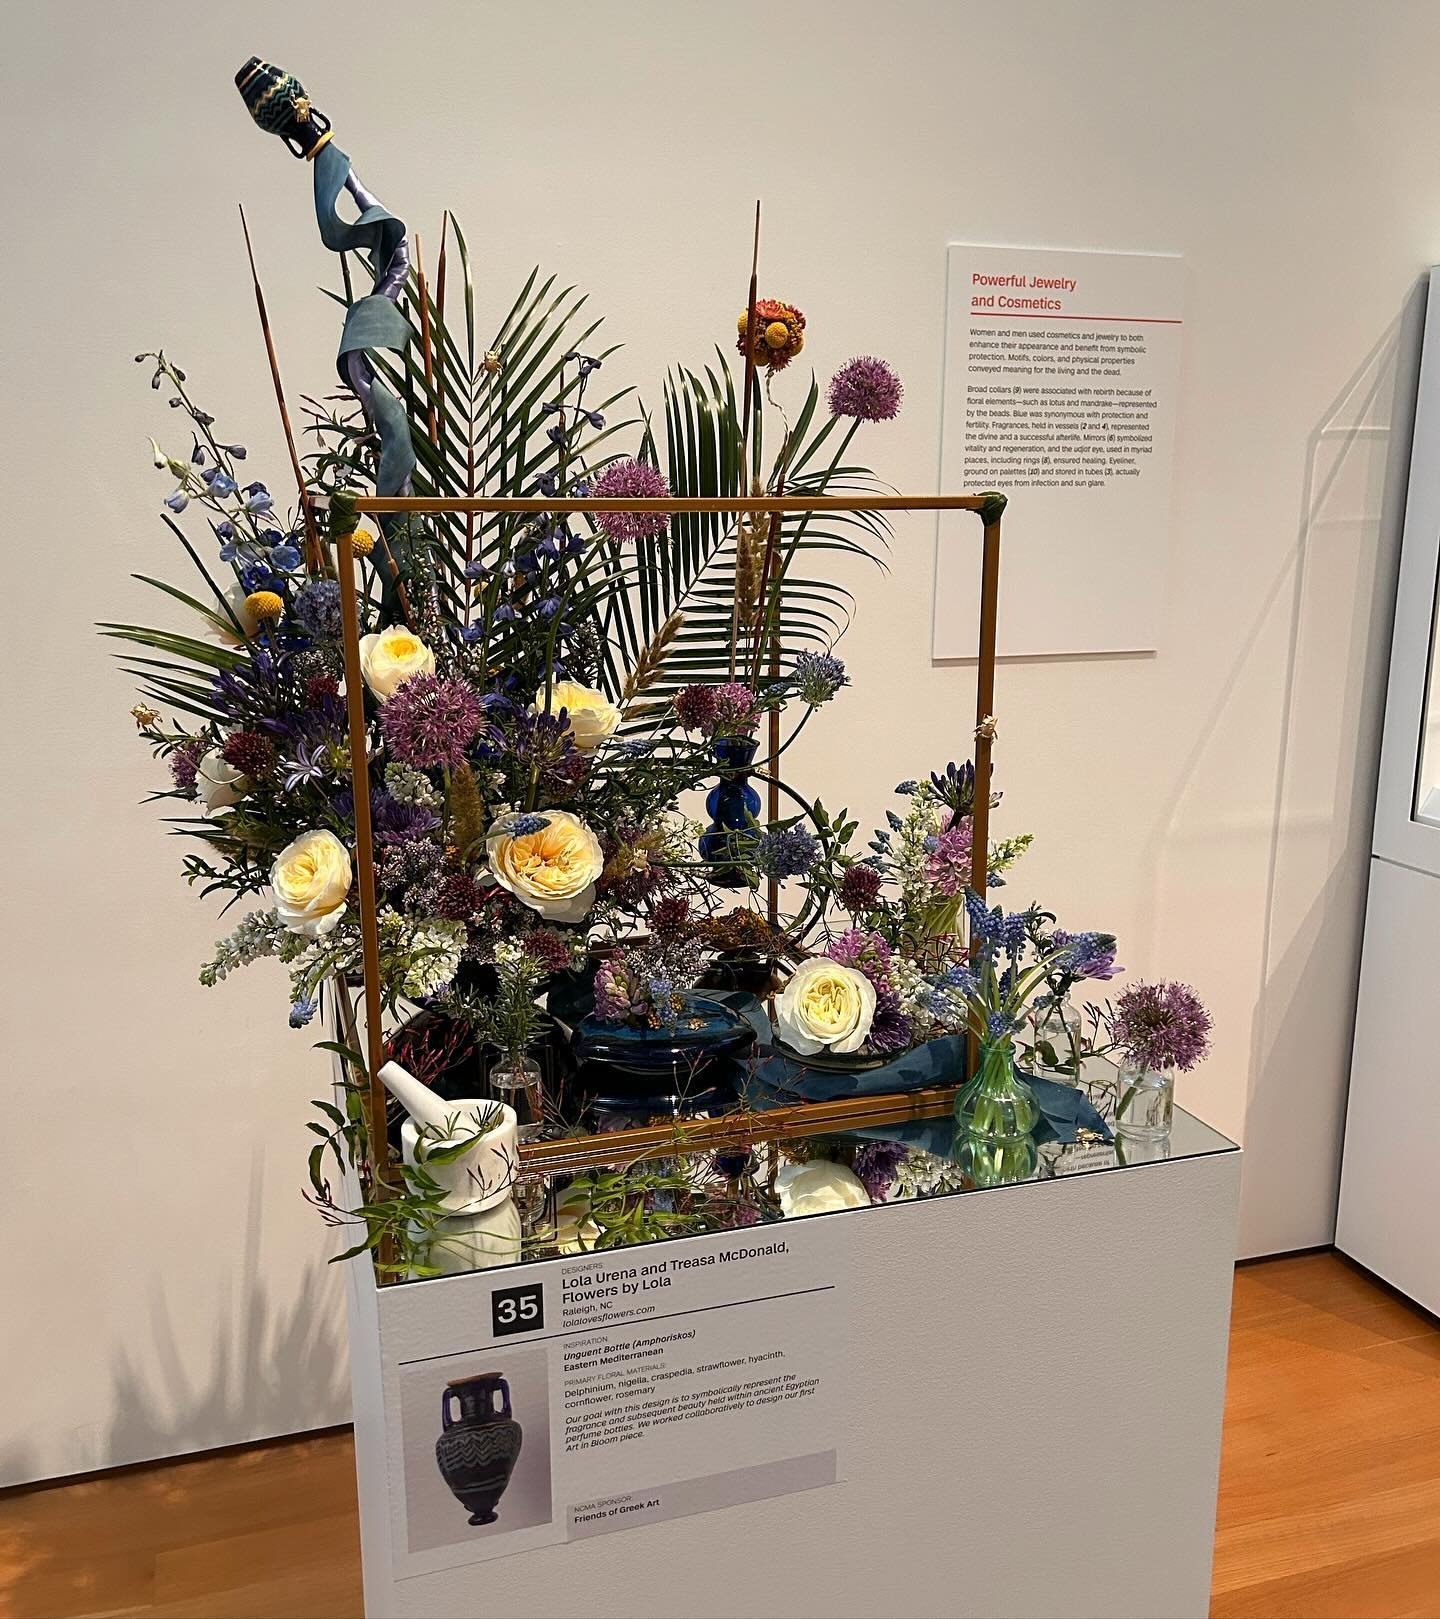 🌼 𝓐𝓡𝓣 𝓘𝓝 𝓑𝓛𝓞𝓞𝓜 🌼 

WOW I am so grateful to be a part of this spectacular exhibition with @ncartmuseum for its 10th year! This is my first year designing and I couldn&rsquo;t be more thrilled with what @treasamcdonald and I dreamed up.

Th